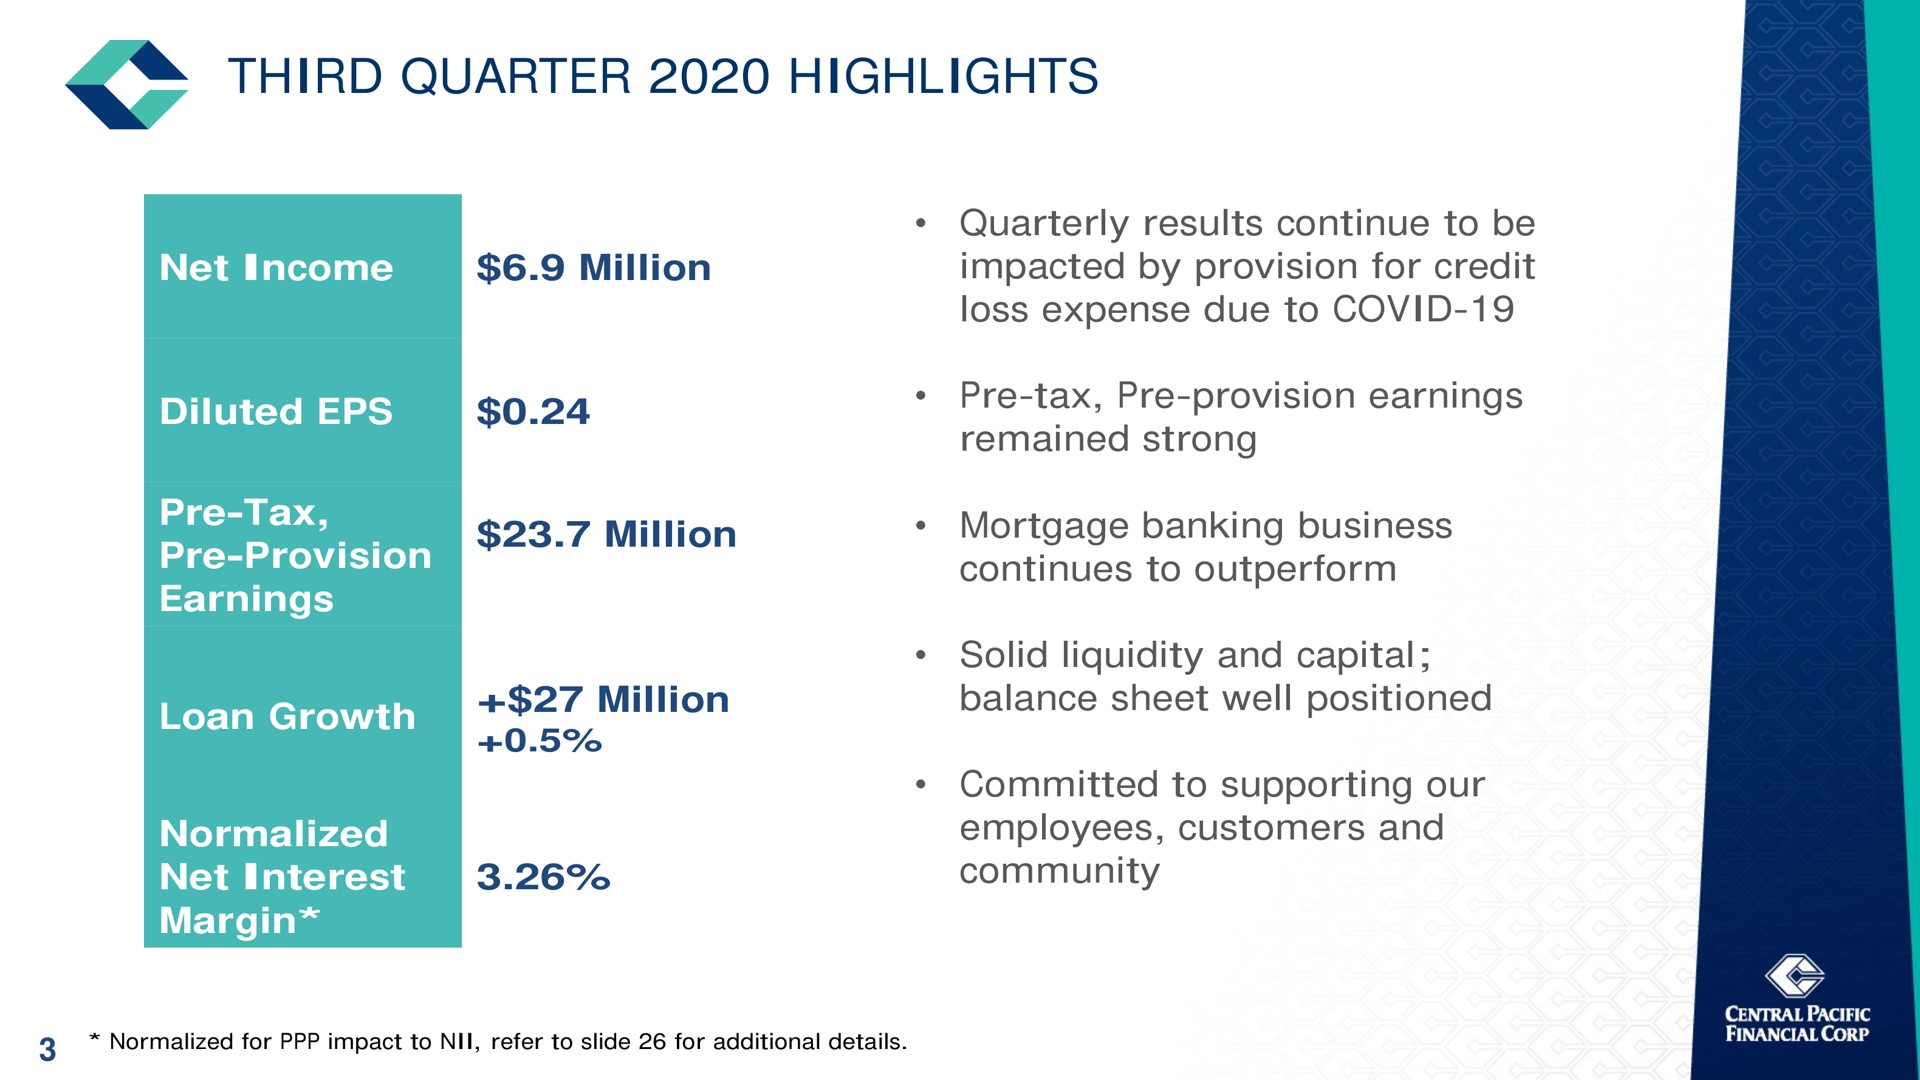 third quarter highlights net income million diluted quarterly results continue to be impacted by provision for credit loss expense due to covid tax provision earnings remained strong tax provision earnings million mortgage banking business continues to outperform loan growth million normalized net interest margin solid liquidity and capital balance sheet well positioned committed to supporting our employees customers and community | Central Pacific Financial